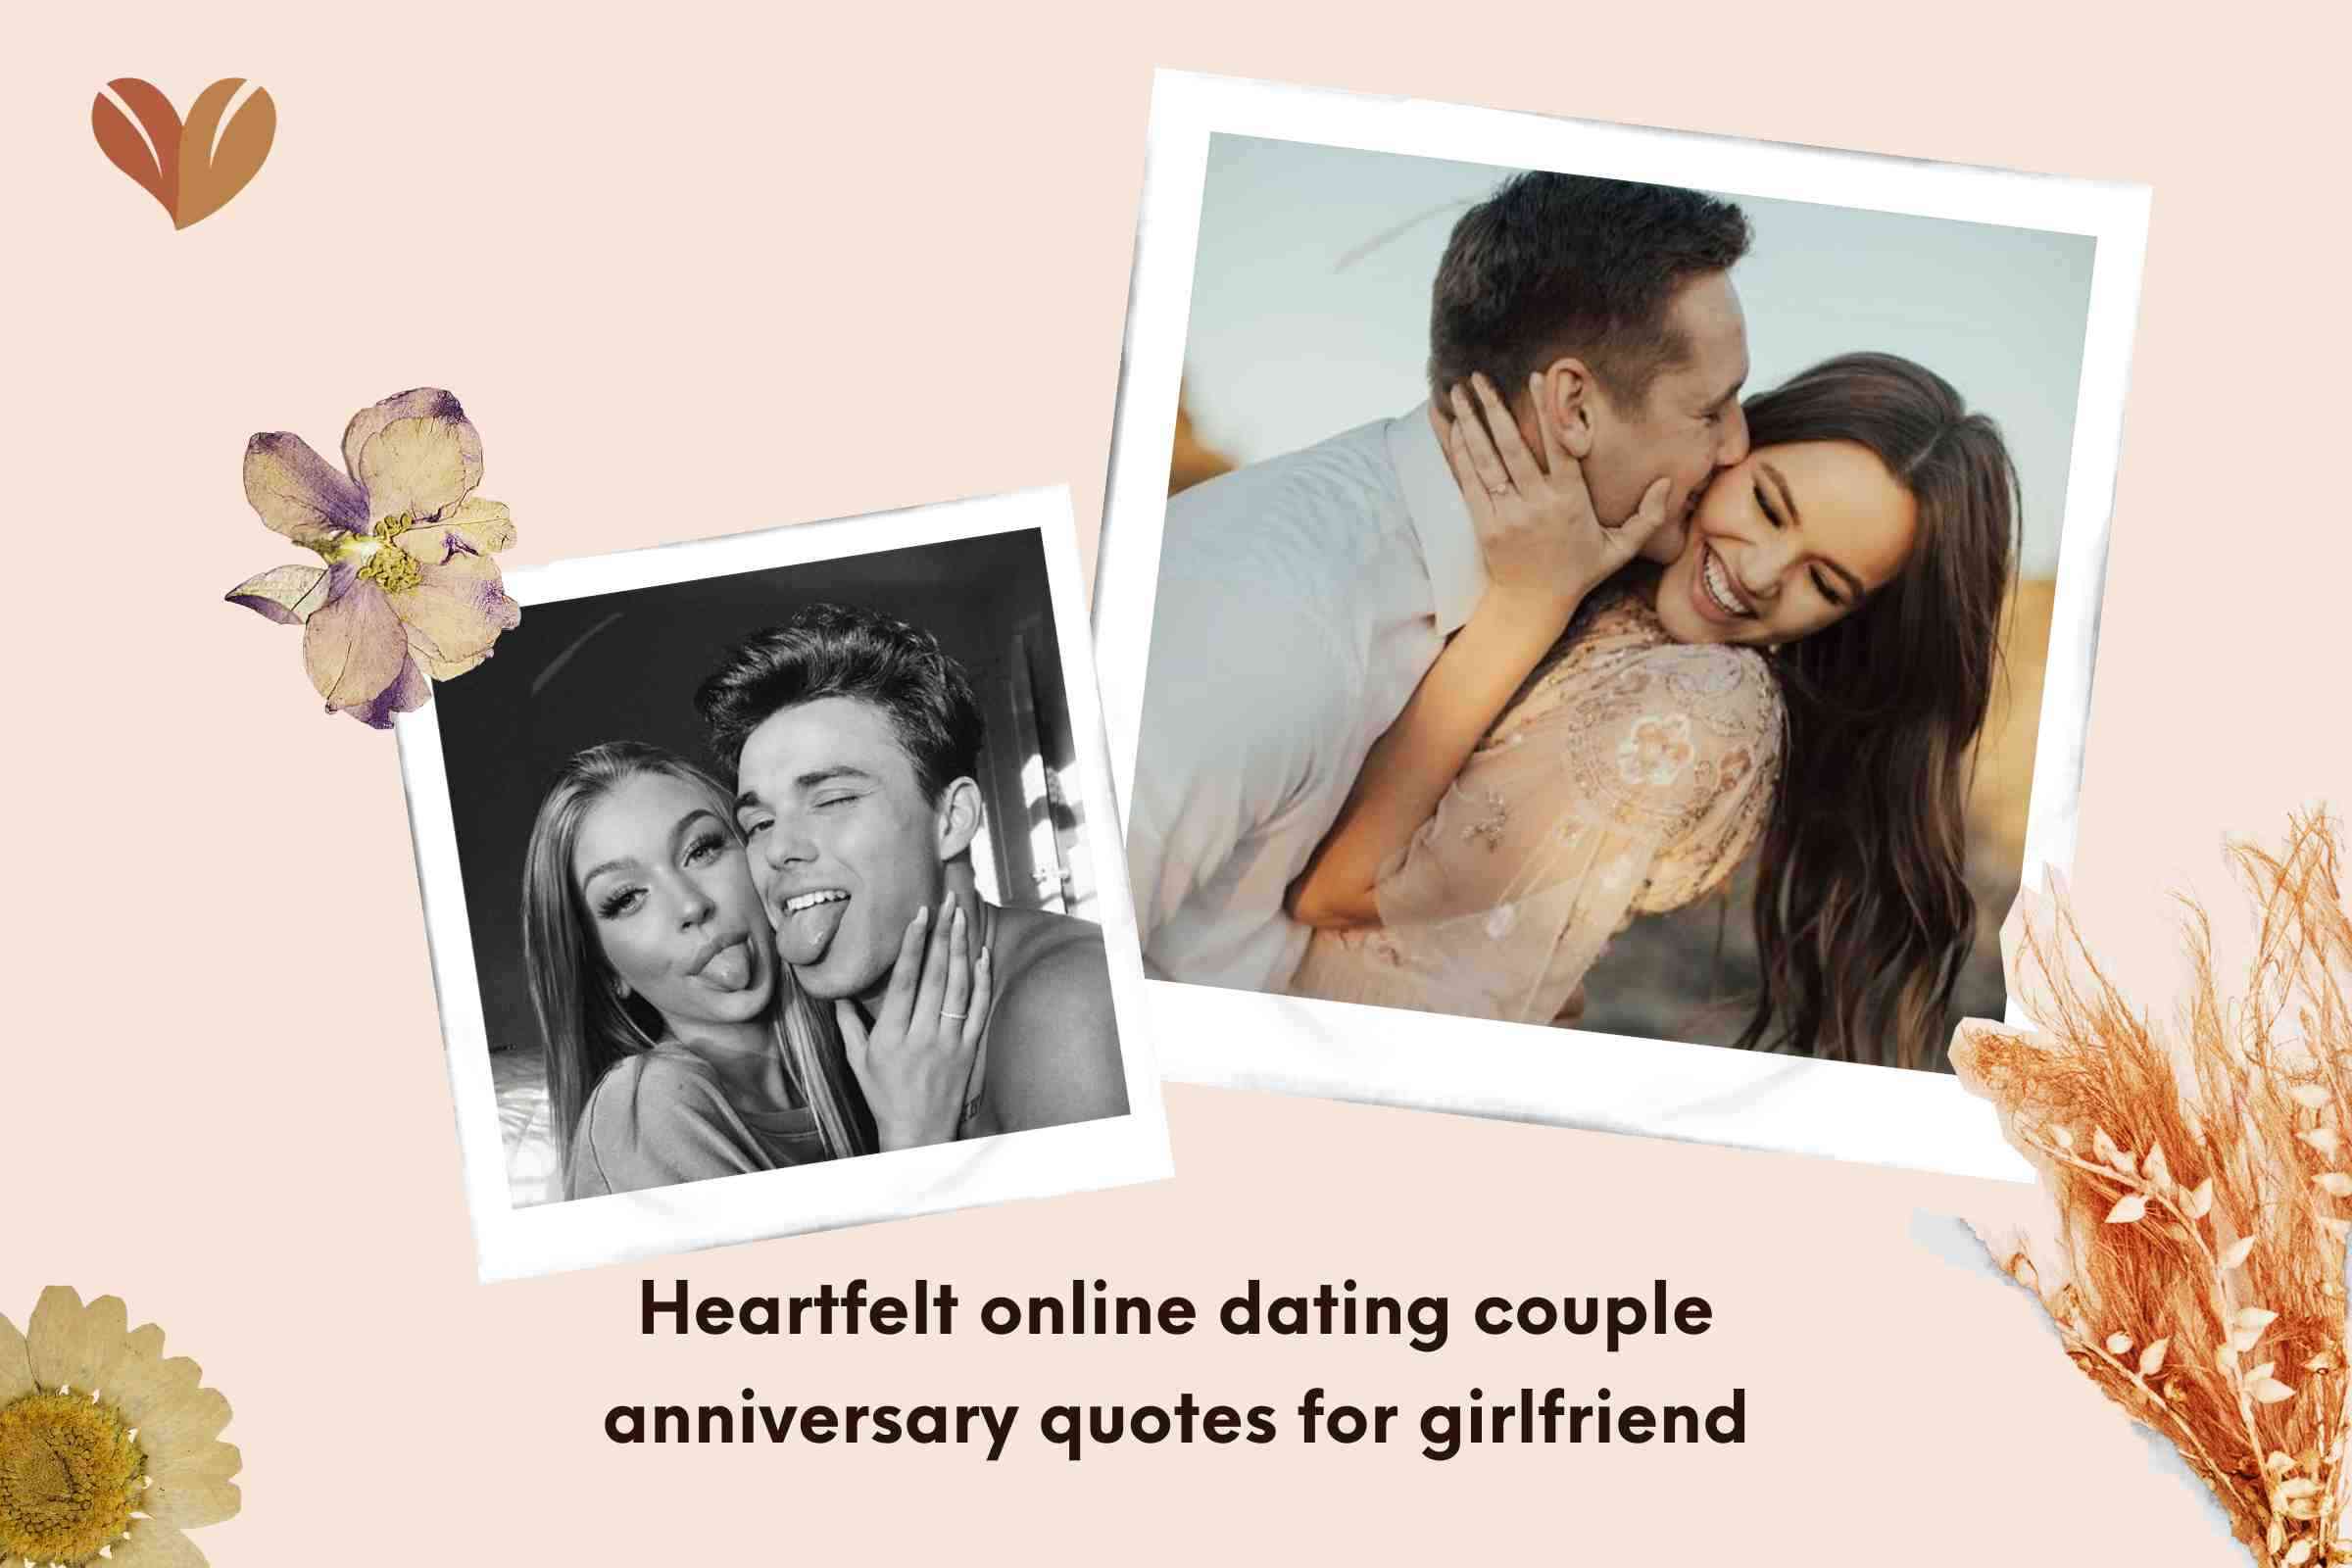 Heartfelt online dating couple anniversary quotes for girlfriend